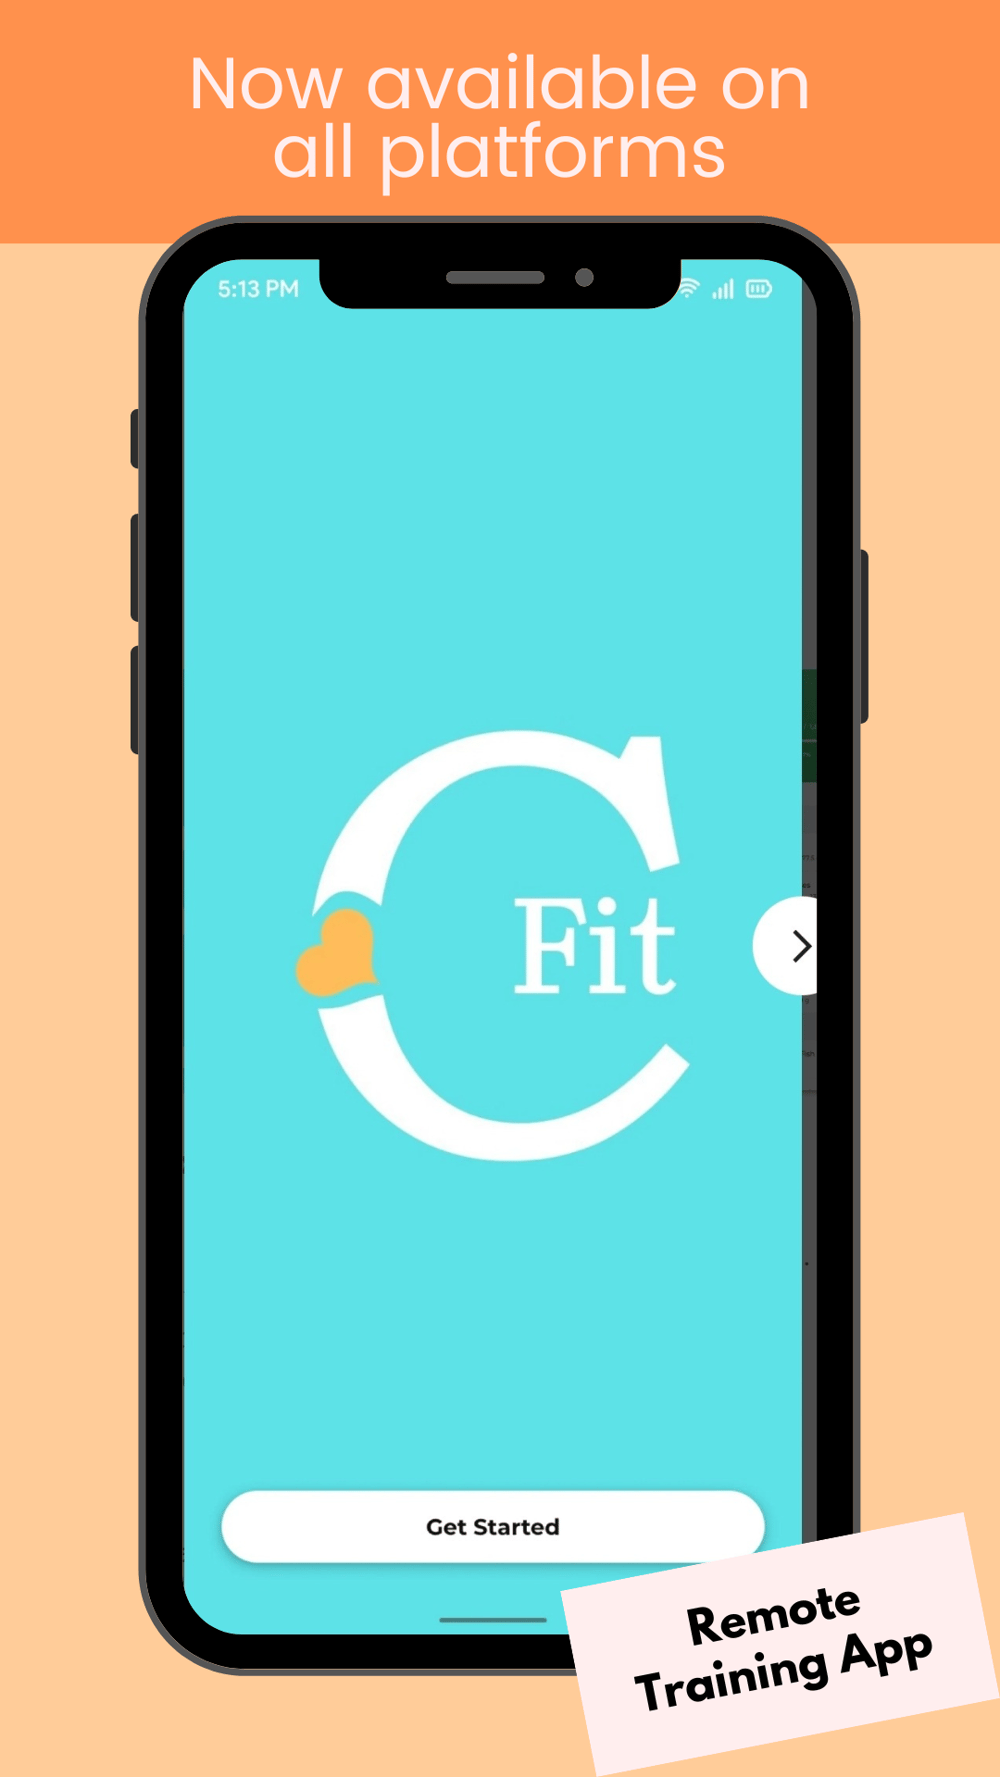 Fitness app called C-Fit available on android and iPhone for remote professional guided exercise training 